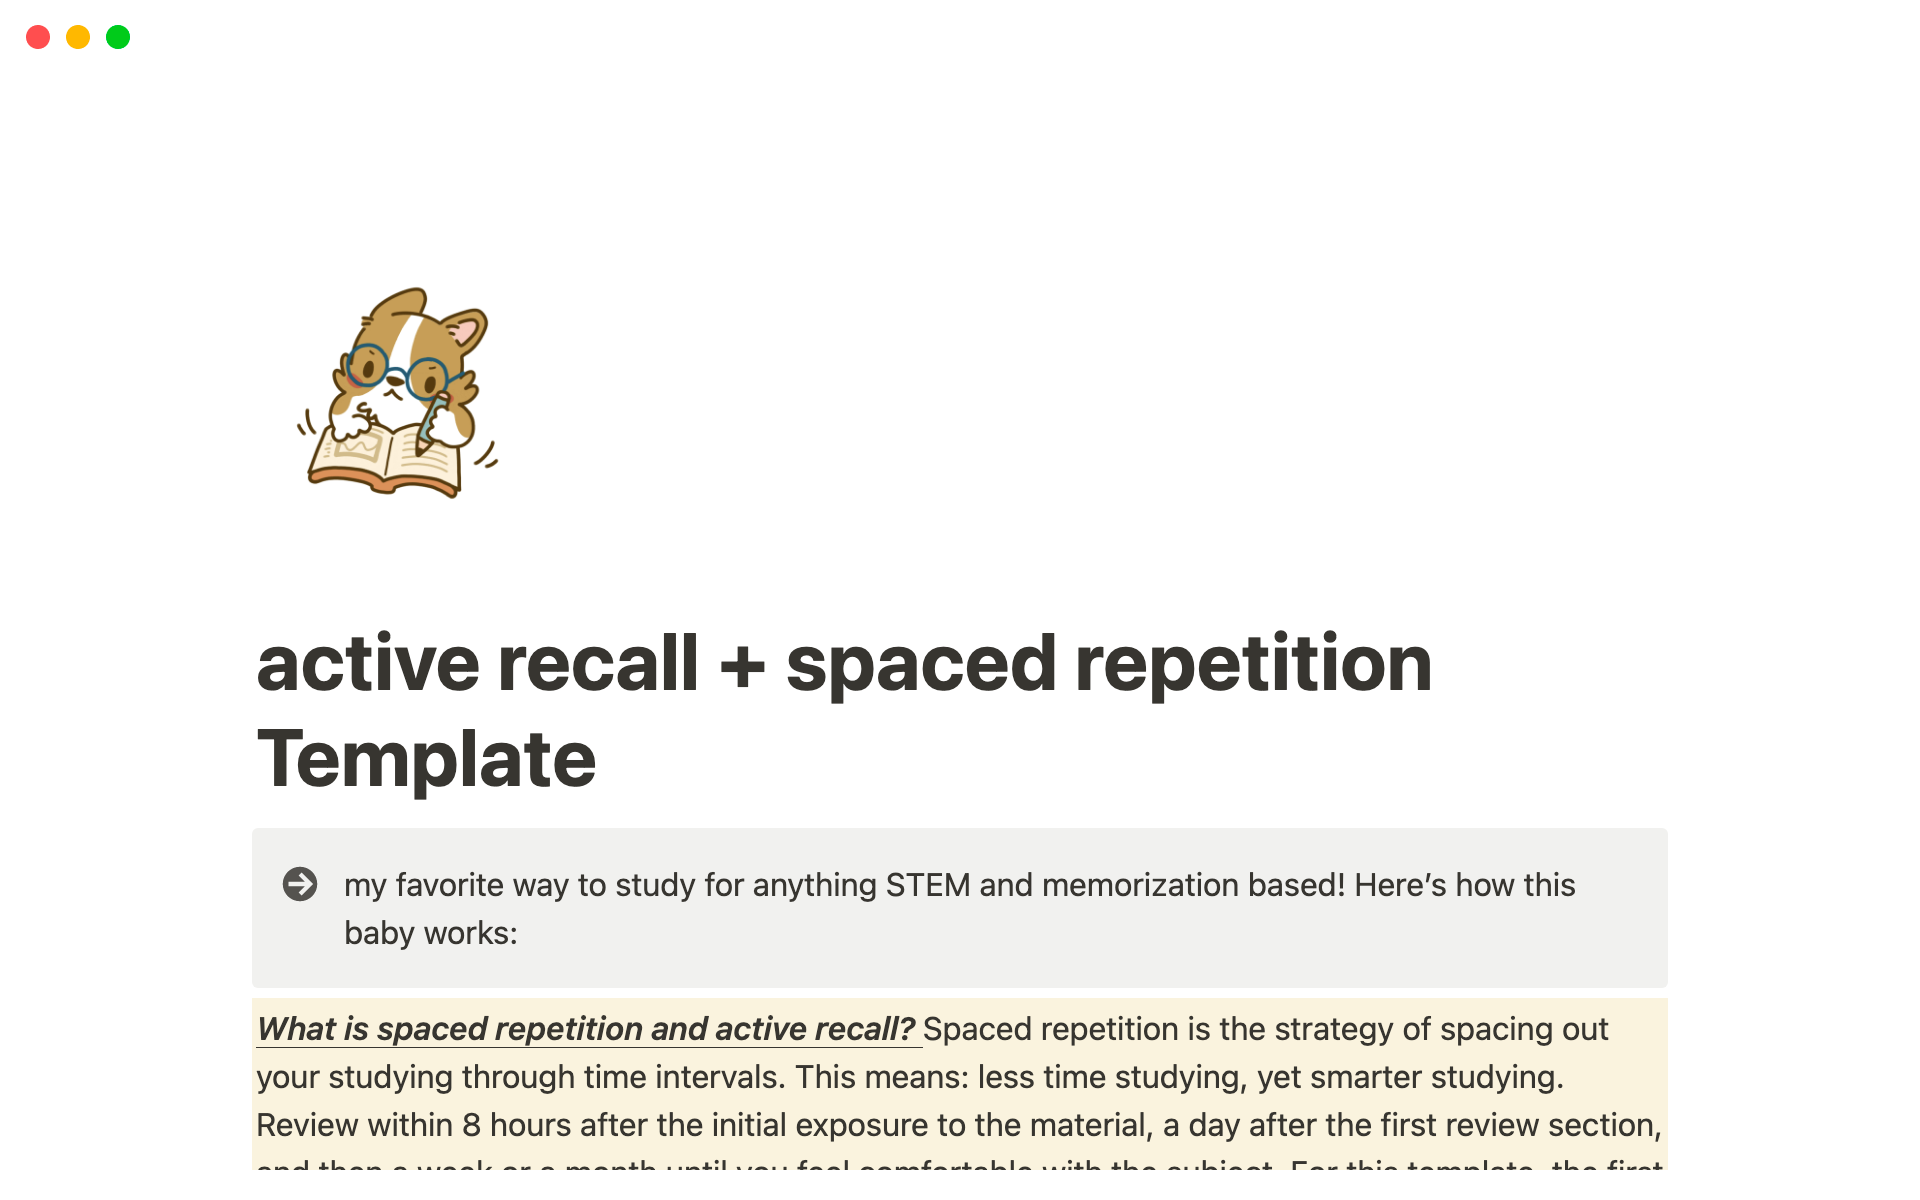 Spaced repetition & active recall study templateのテンプレートのプレビュー